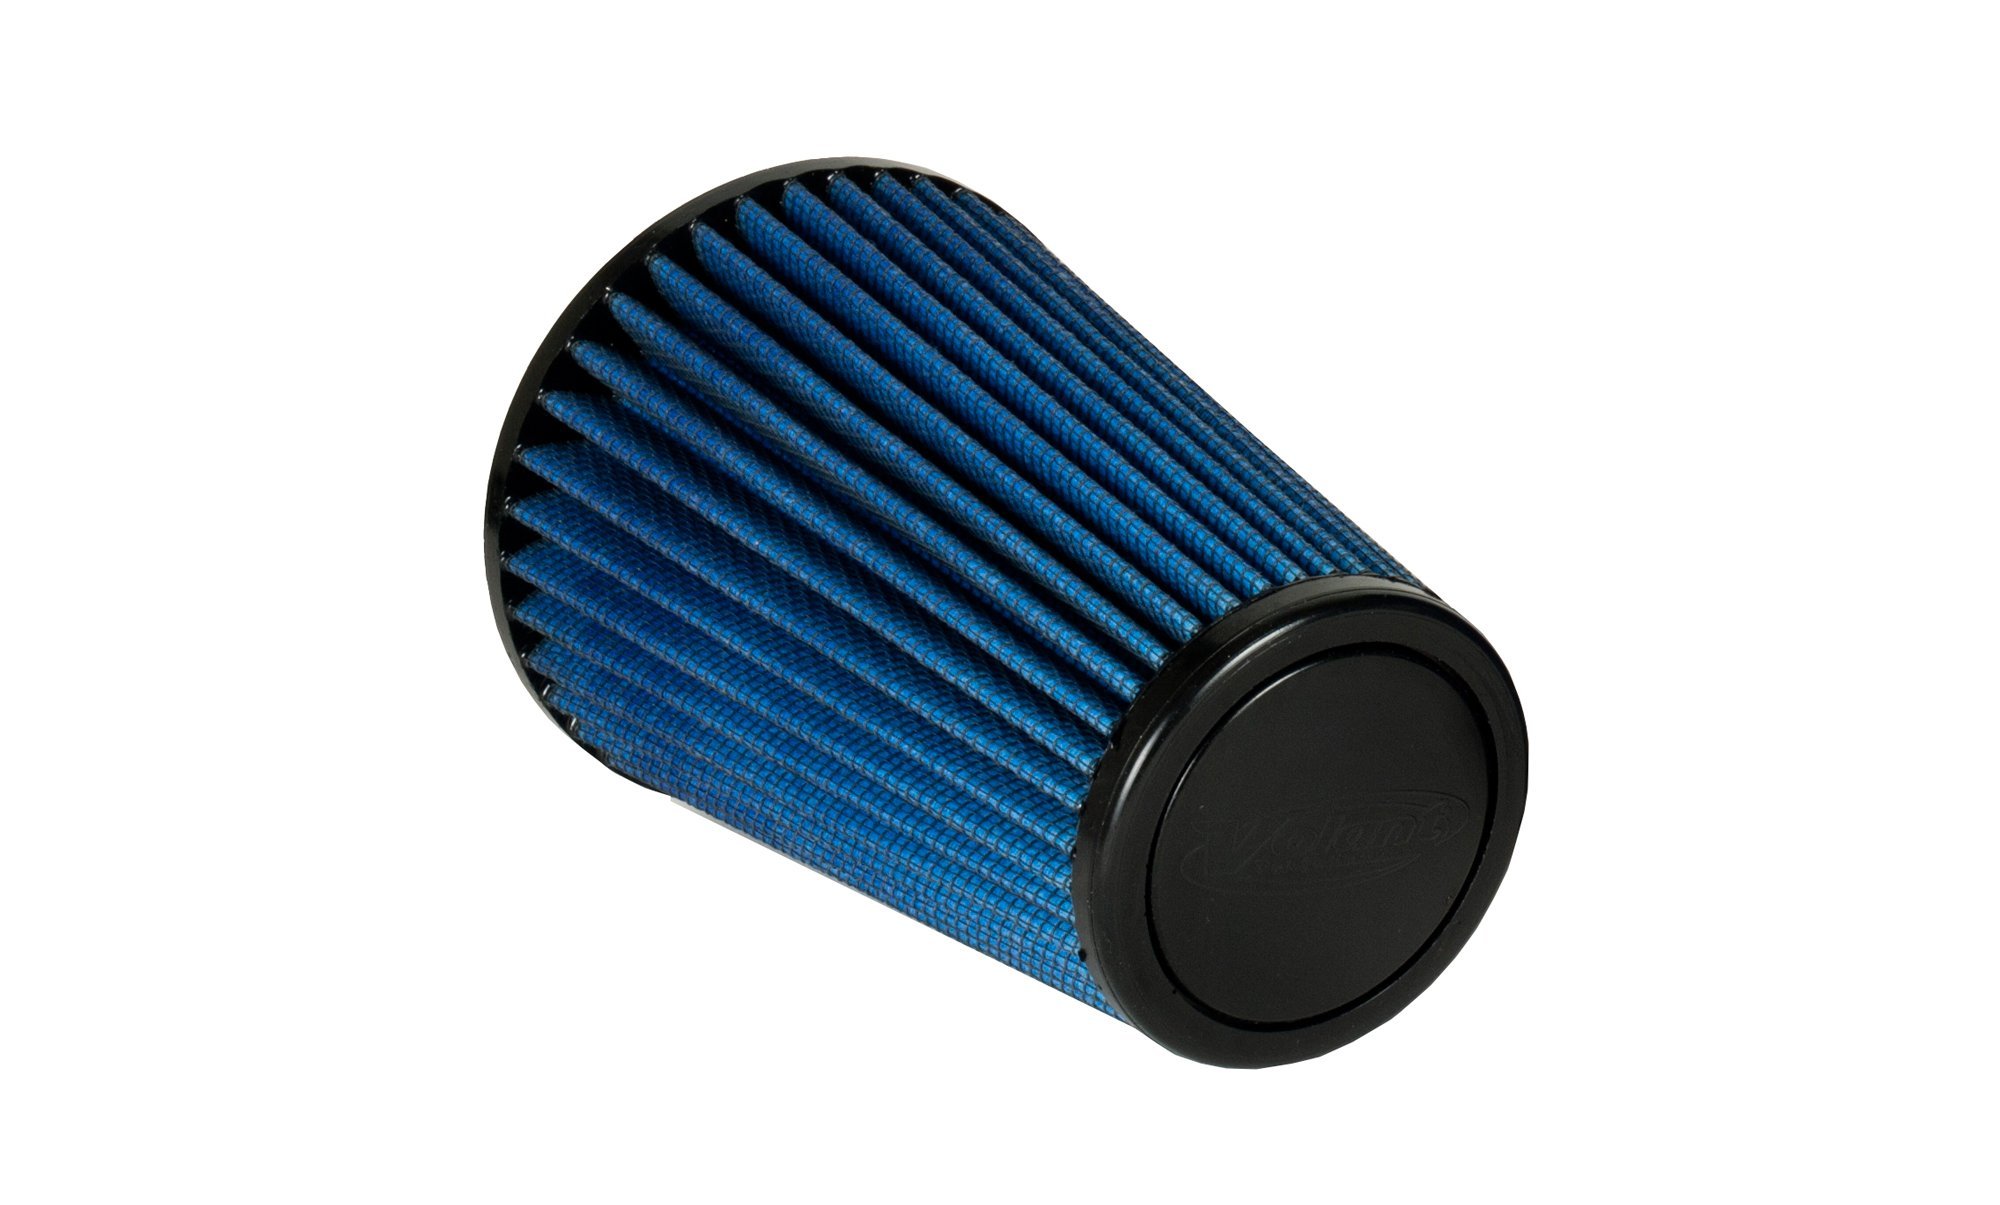 VOLANT PRO 5 FILTER 3.5'F 5'B 3.5'T 7'H MAXFLOW OILED AIR FILTER (5114) REPLACEMENT AIR FILTER